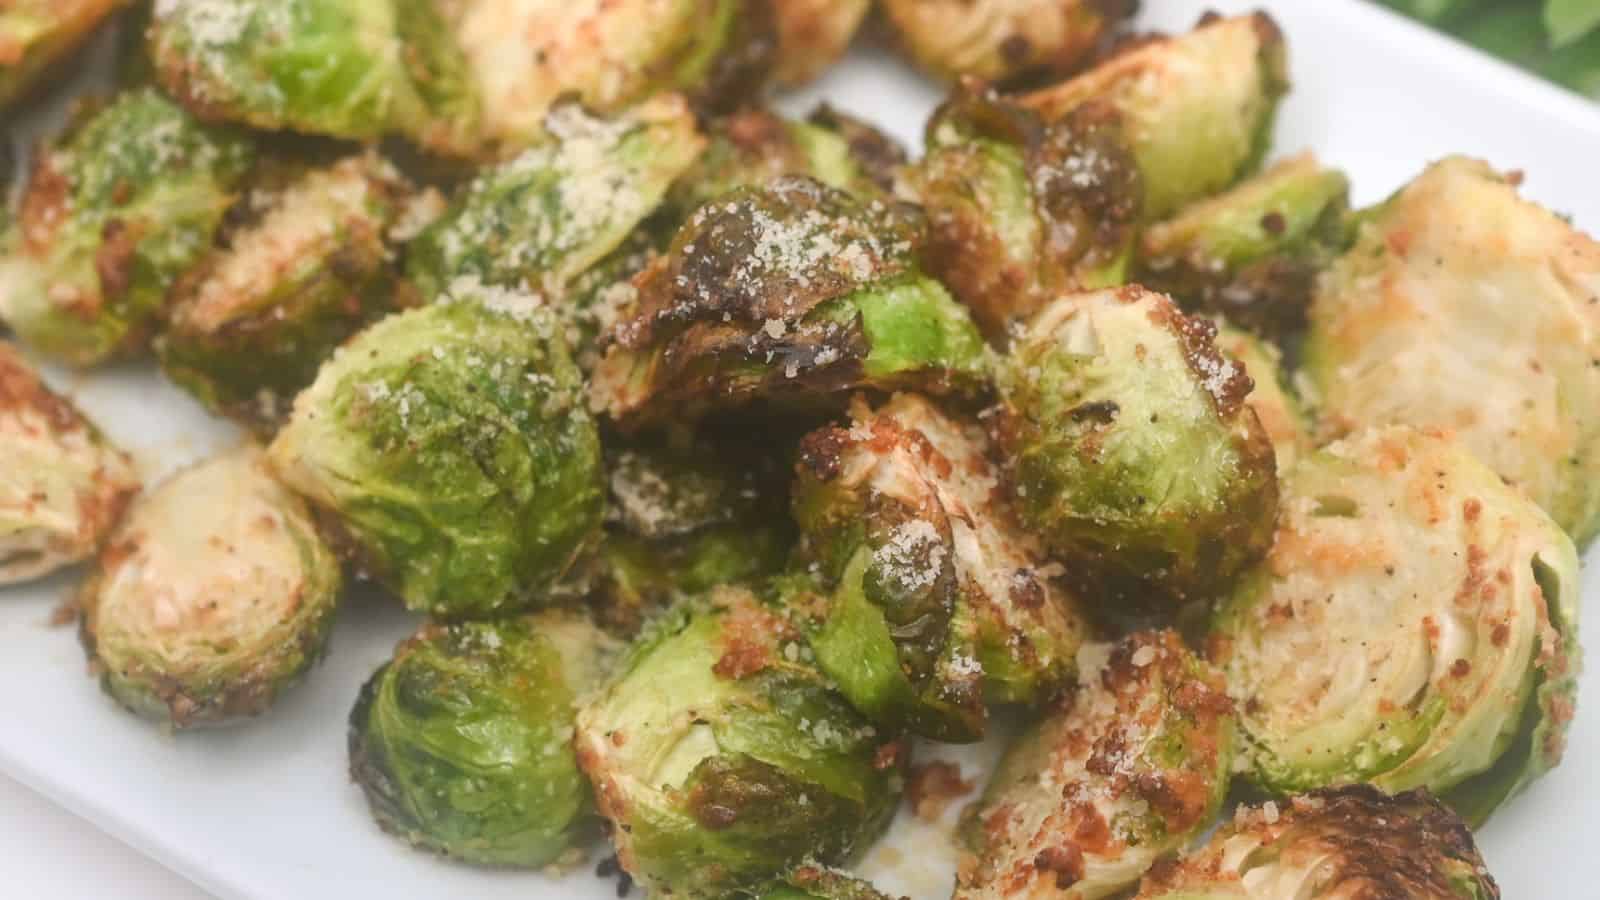 Air-fried brussels sprouts with grated parmesan cheese on a white plate.